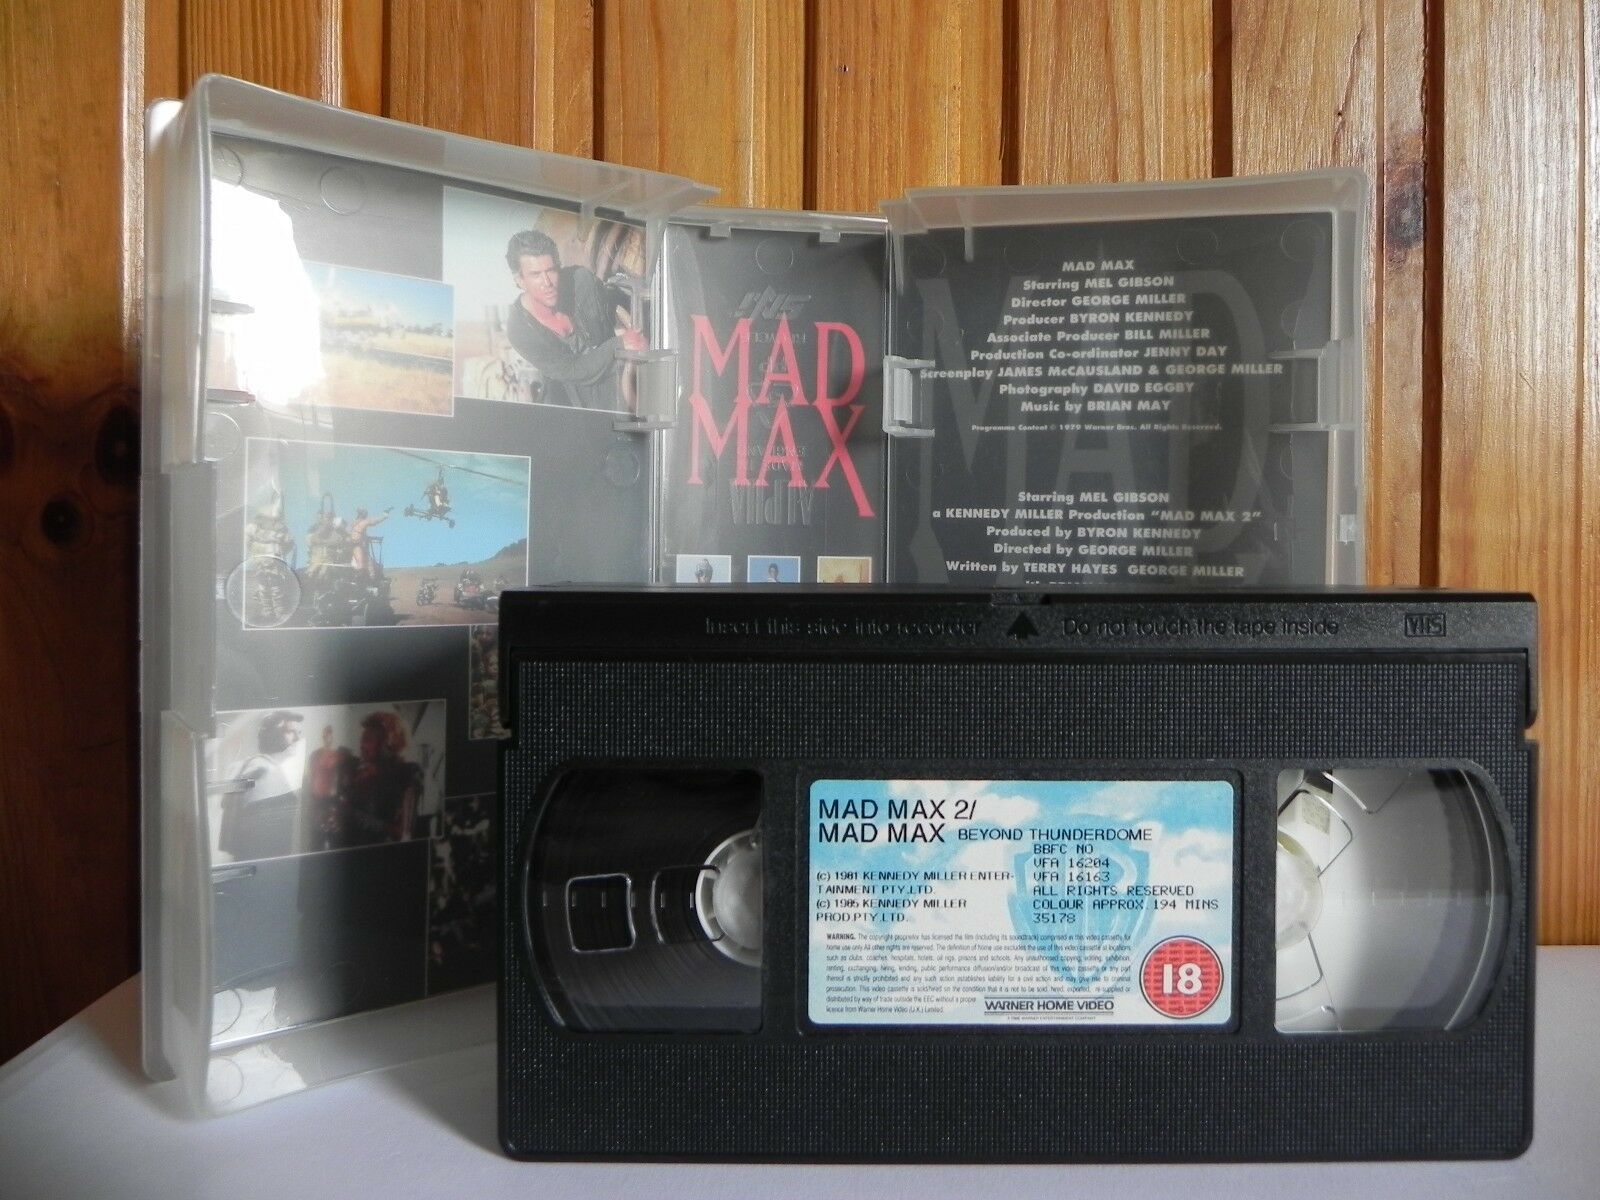 Mad Max: The Complete Action Set - Warner Home - Sci-Fi - Mel Gibson - Pal VHS-